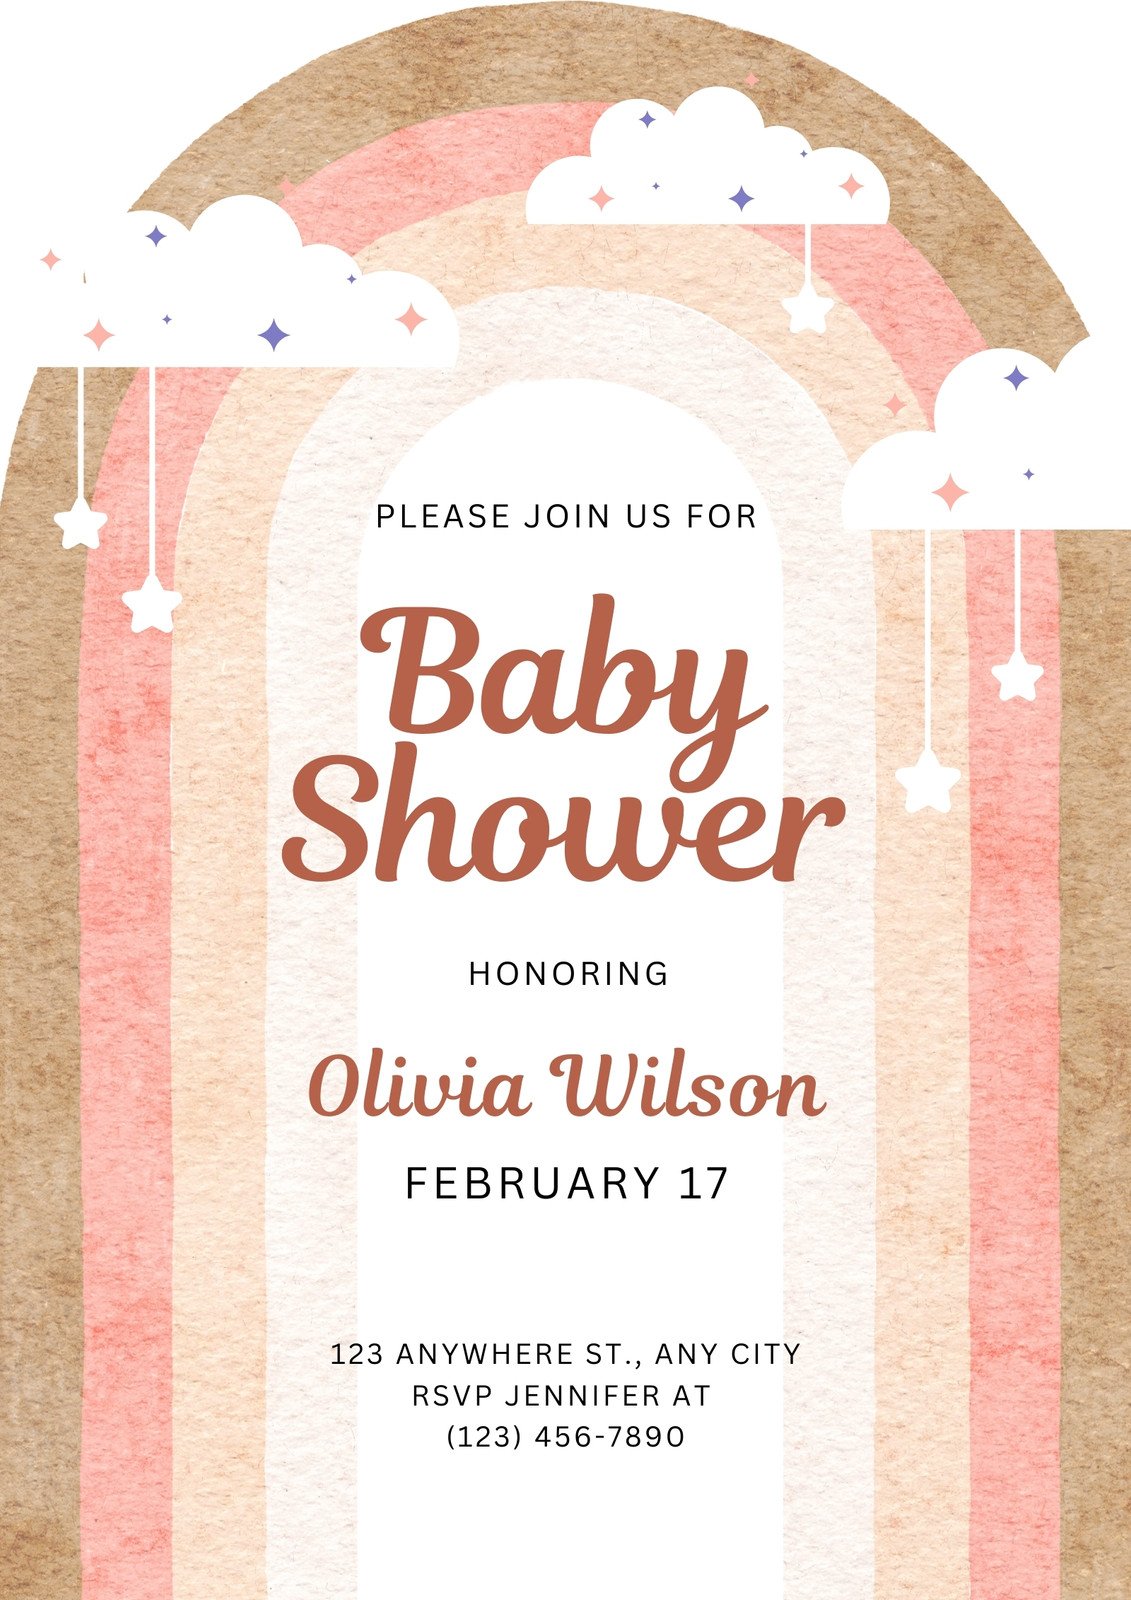 Baby Registry Greeting - A Celebrating of New Arrival